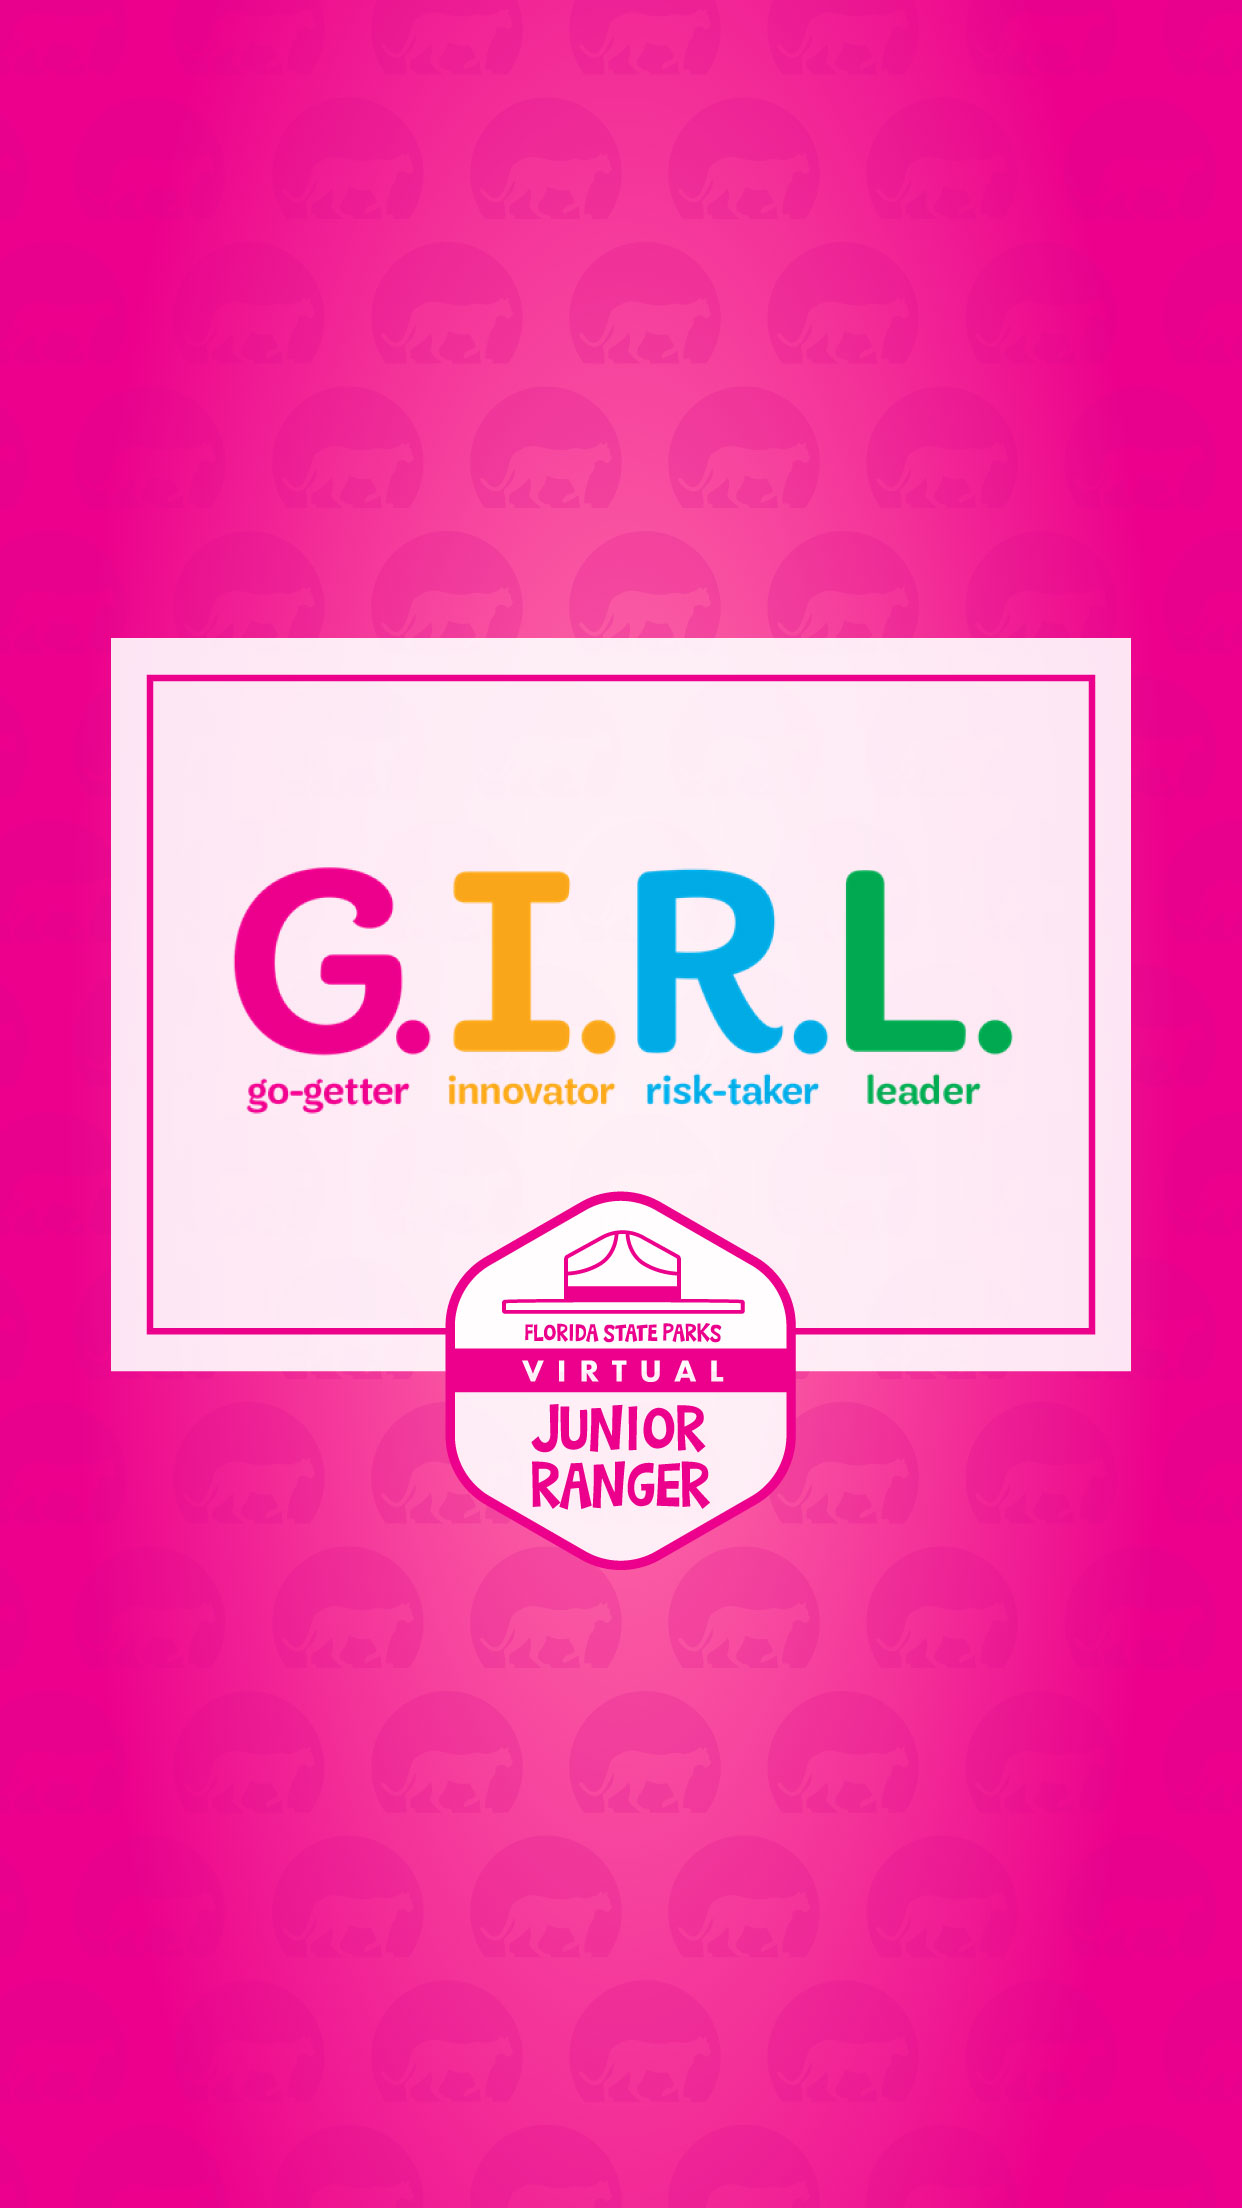 Virtual Junior Ranger Badge and GIRL on Magenta Background formatted for Mobile